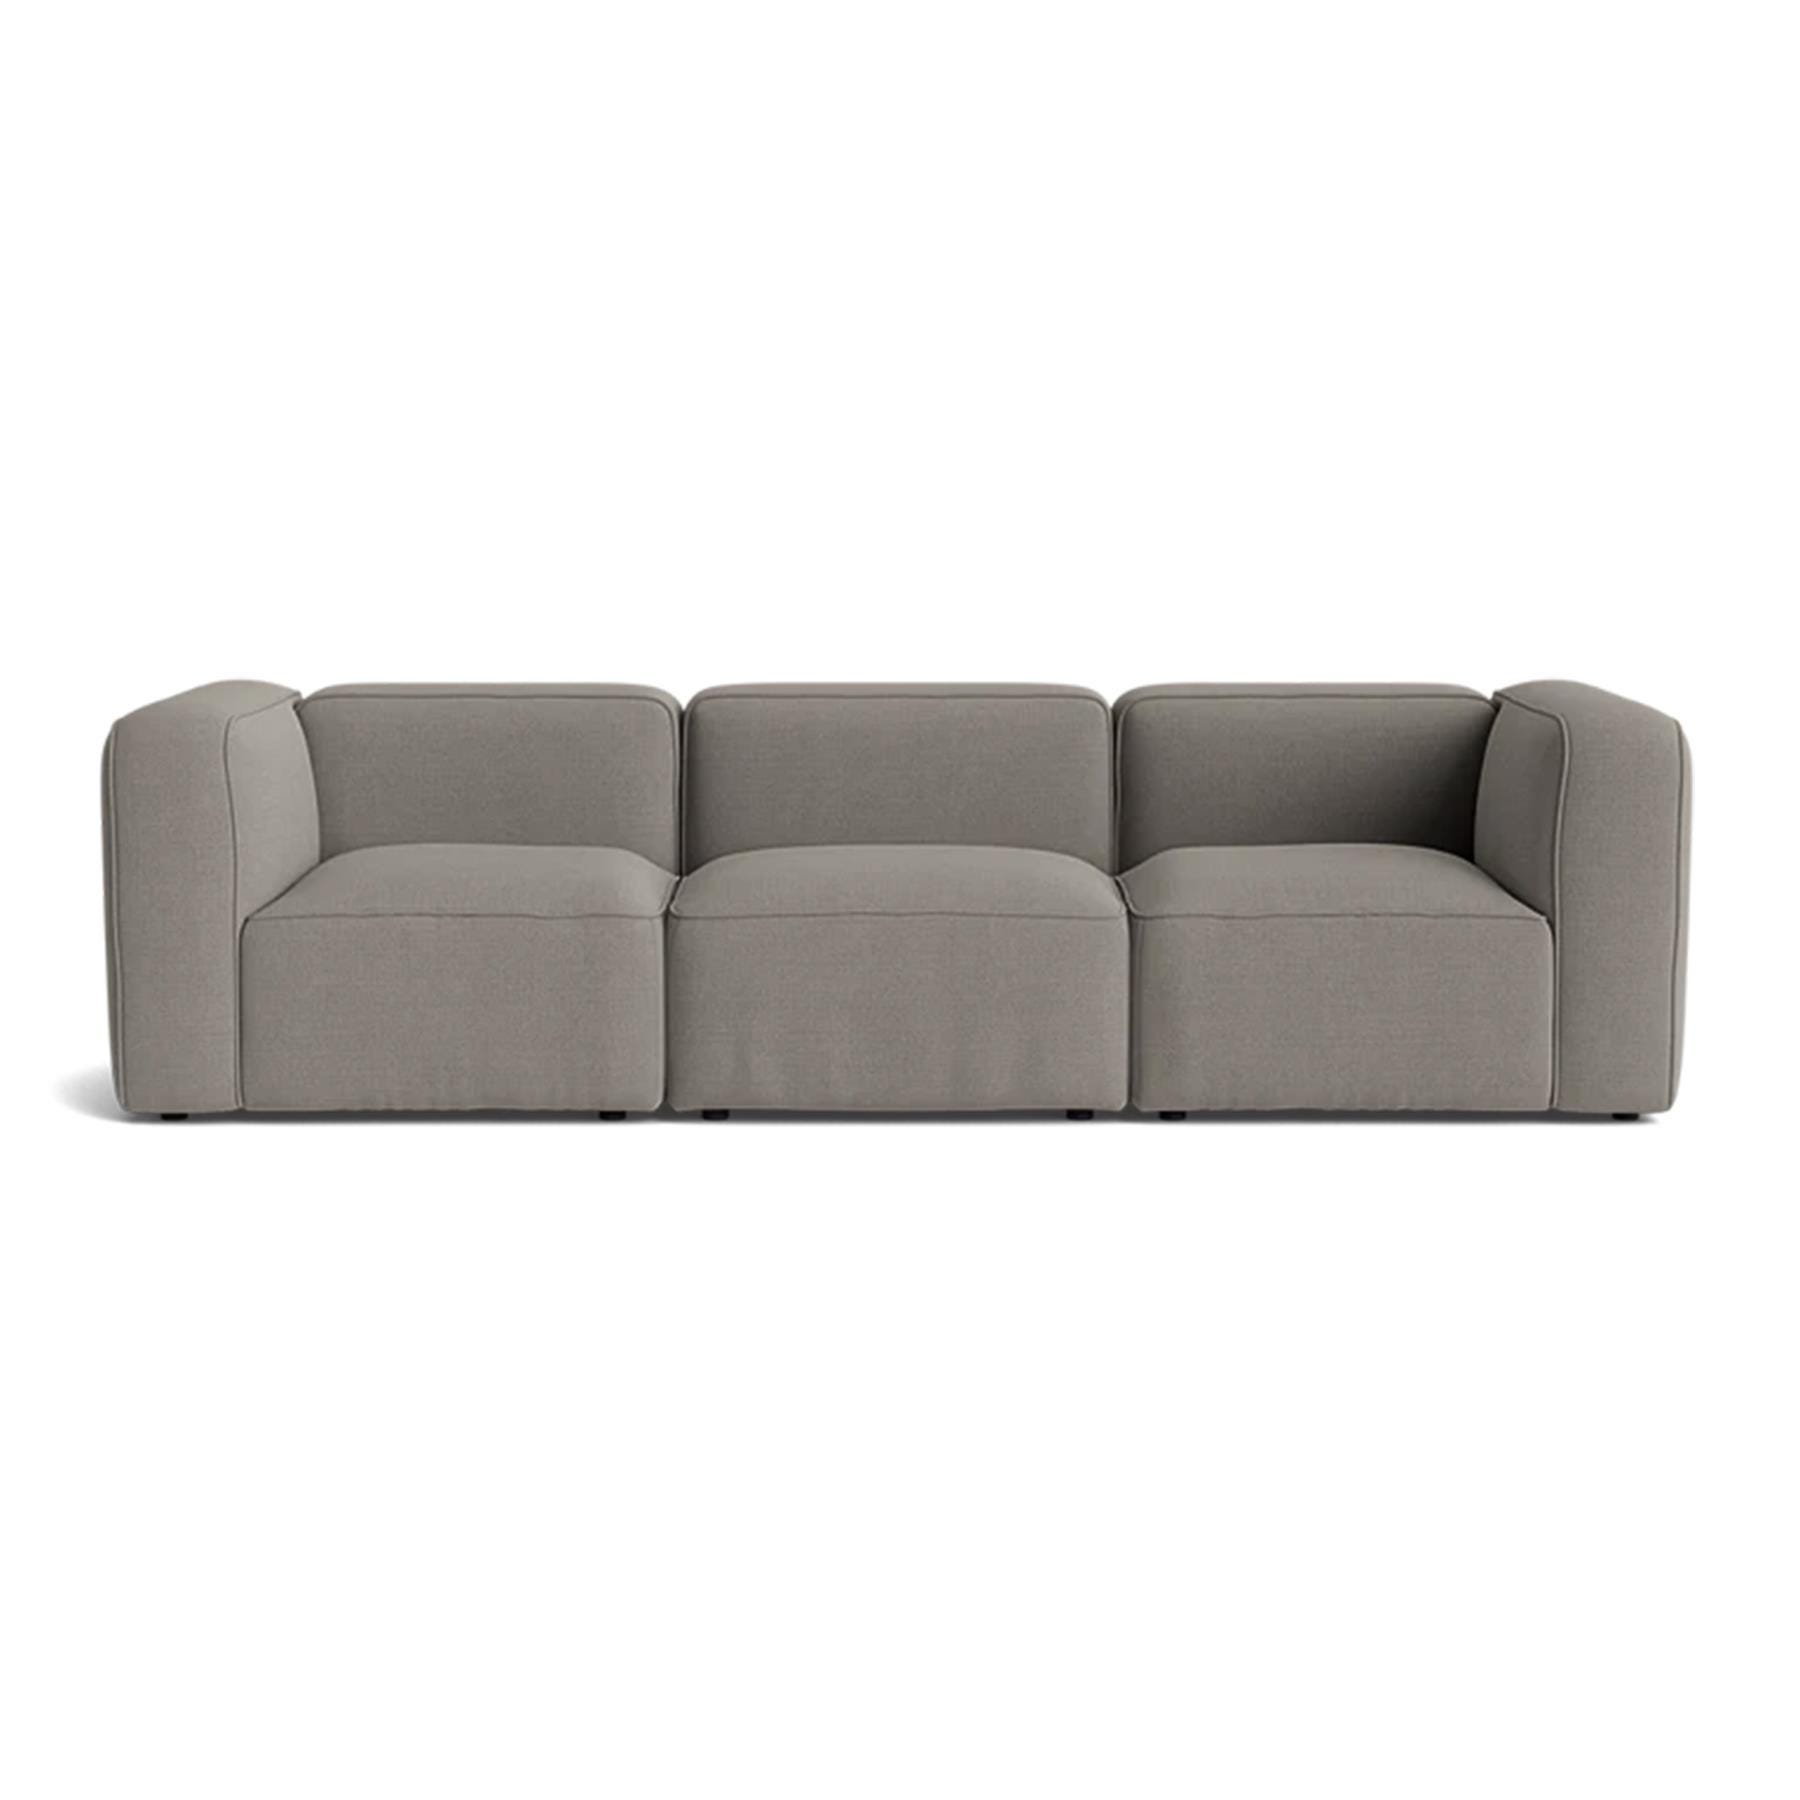 Make Nordic Basecamp 3 Seater Sofa Fiord 262 Brown Designer Furniture From Holloways Of Ludlow